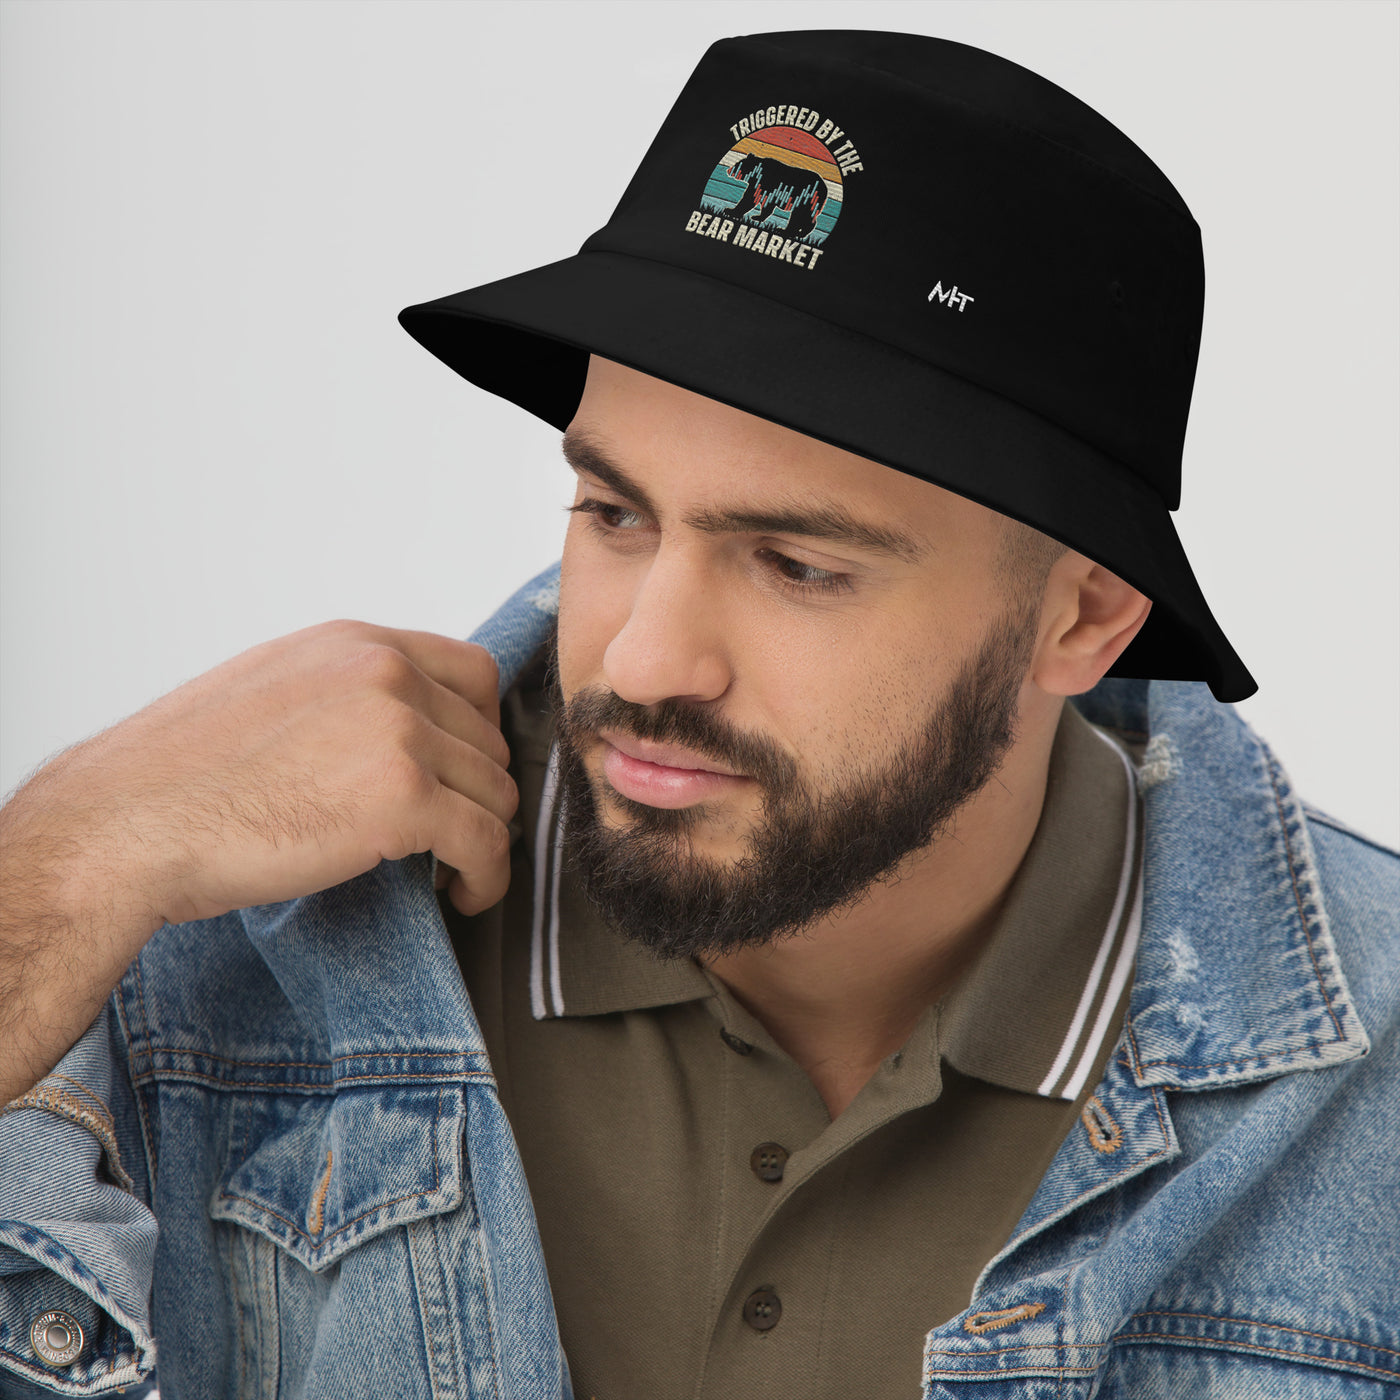 Triggered by the Bear Market - Bucket Hat